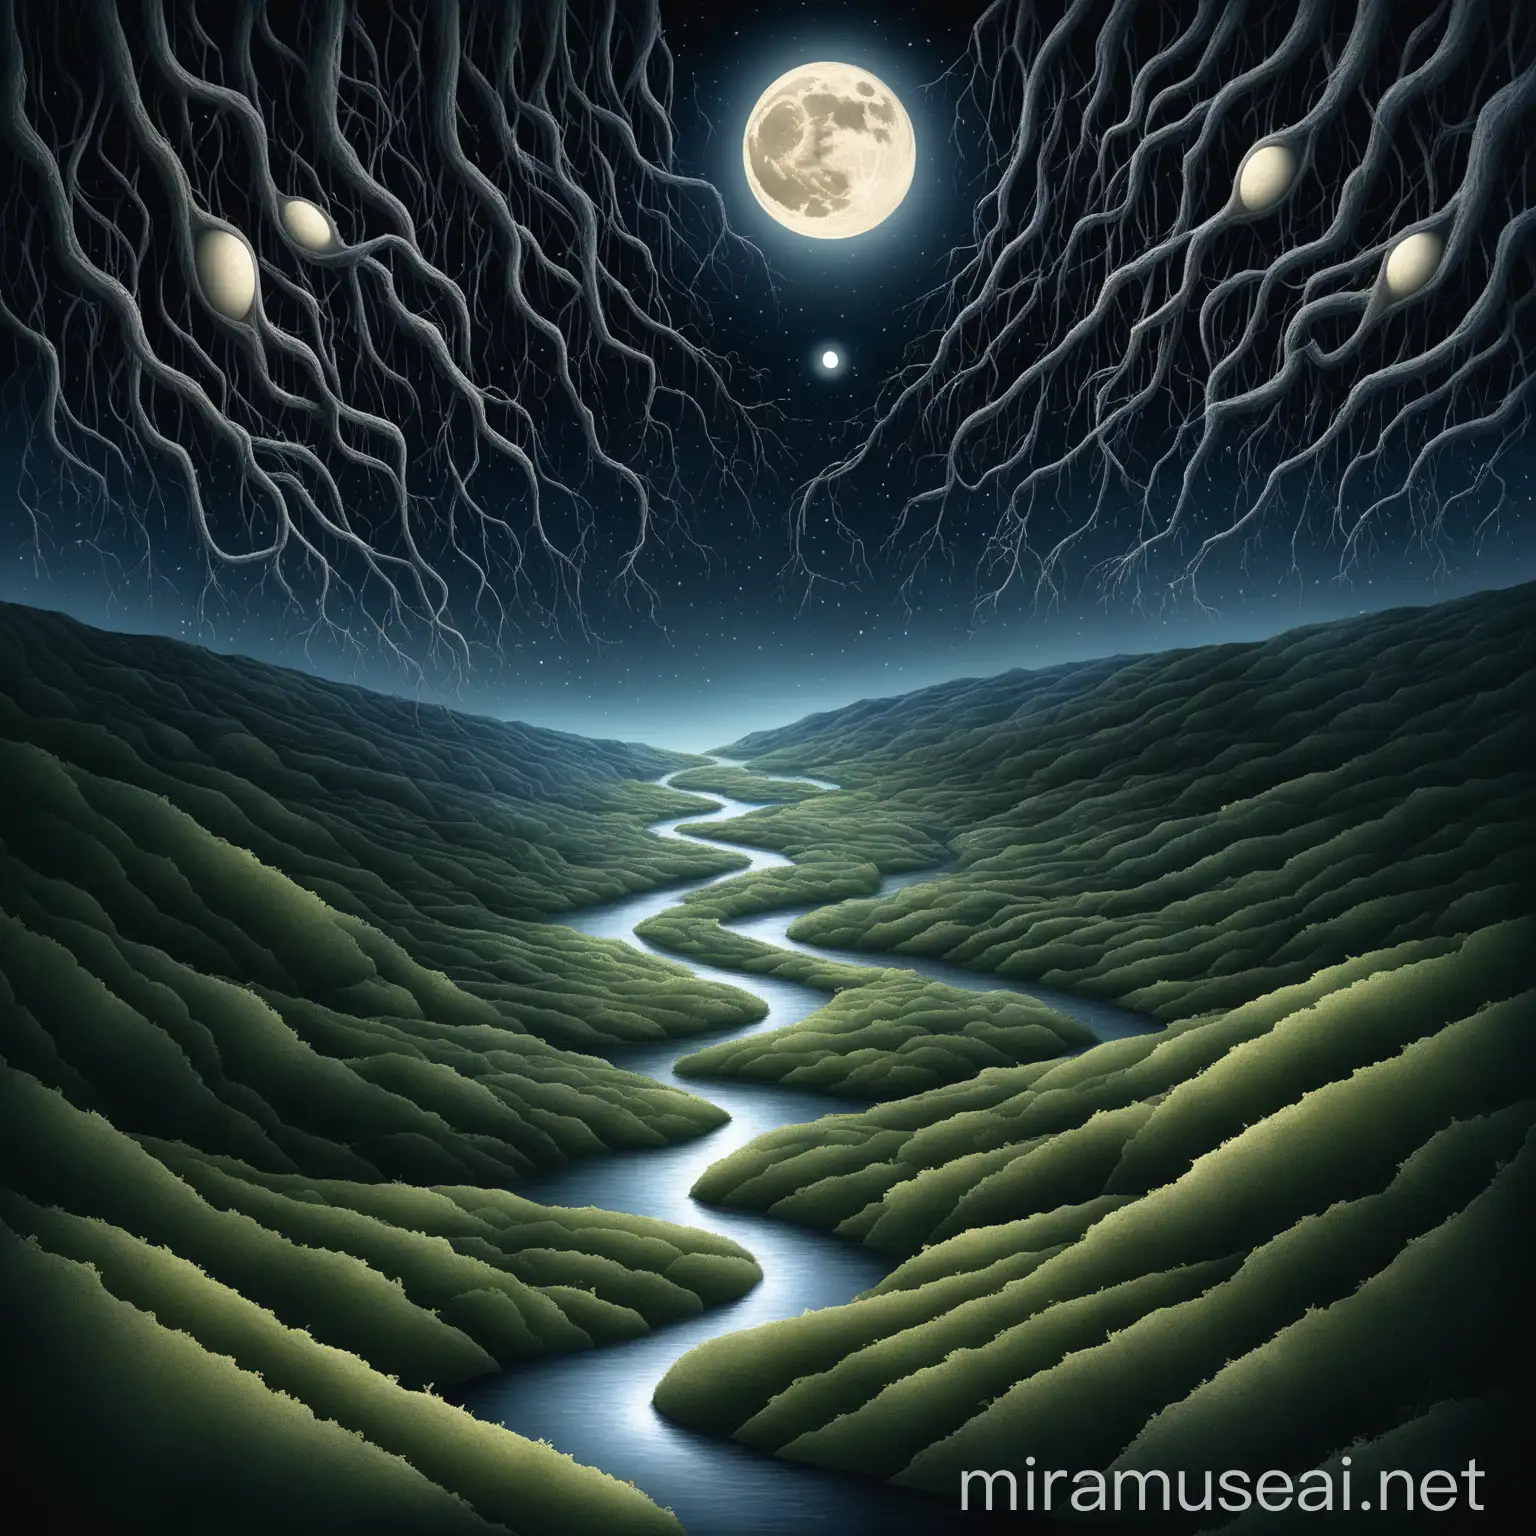 Imagine a serene night scene, where the moon hangs in the sky, its gentle light casting shadows over a landscape of rolling hills. In the foreground, the peripapillary atrophy stands tall, resembling the moon, its presence dominant yet ethereal. Amidst the hills, scattered clusters of ganglion cells shimmer like stars, their delicate beauty juxtaposed against the starkness of the atrophy. Meanwhile, a winding river of retinal nerve fiber defect meanders through the landscape, its path illuminated by the moonlight, symbolizing the journey of understanding through the intricacies of ocular health.